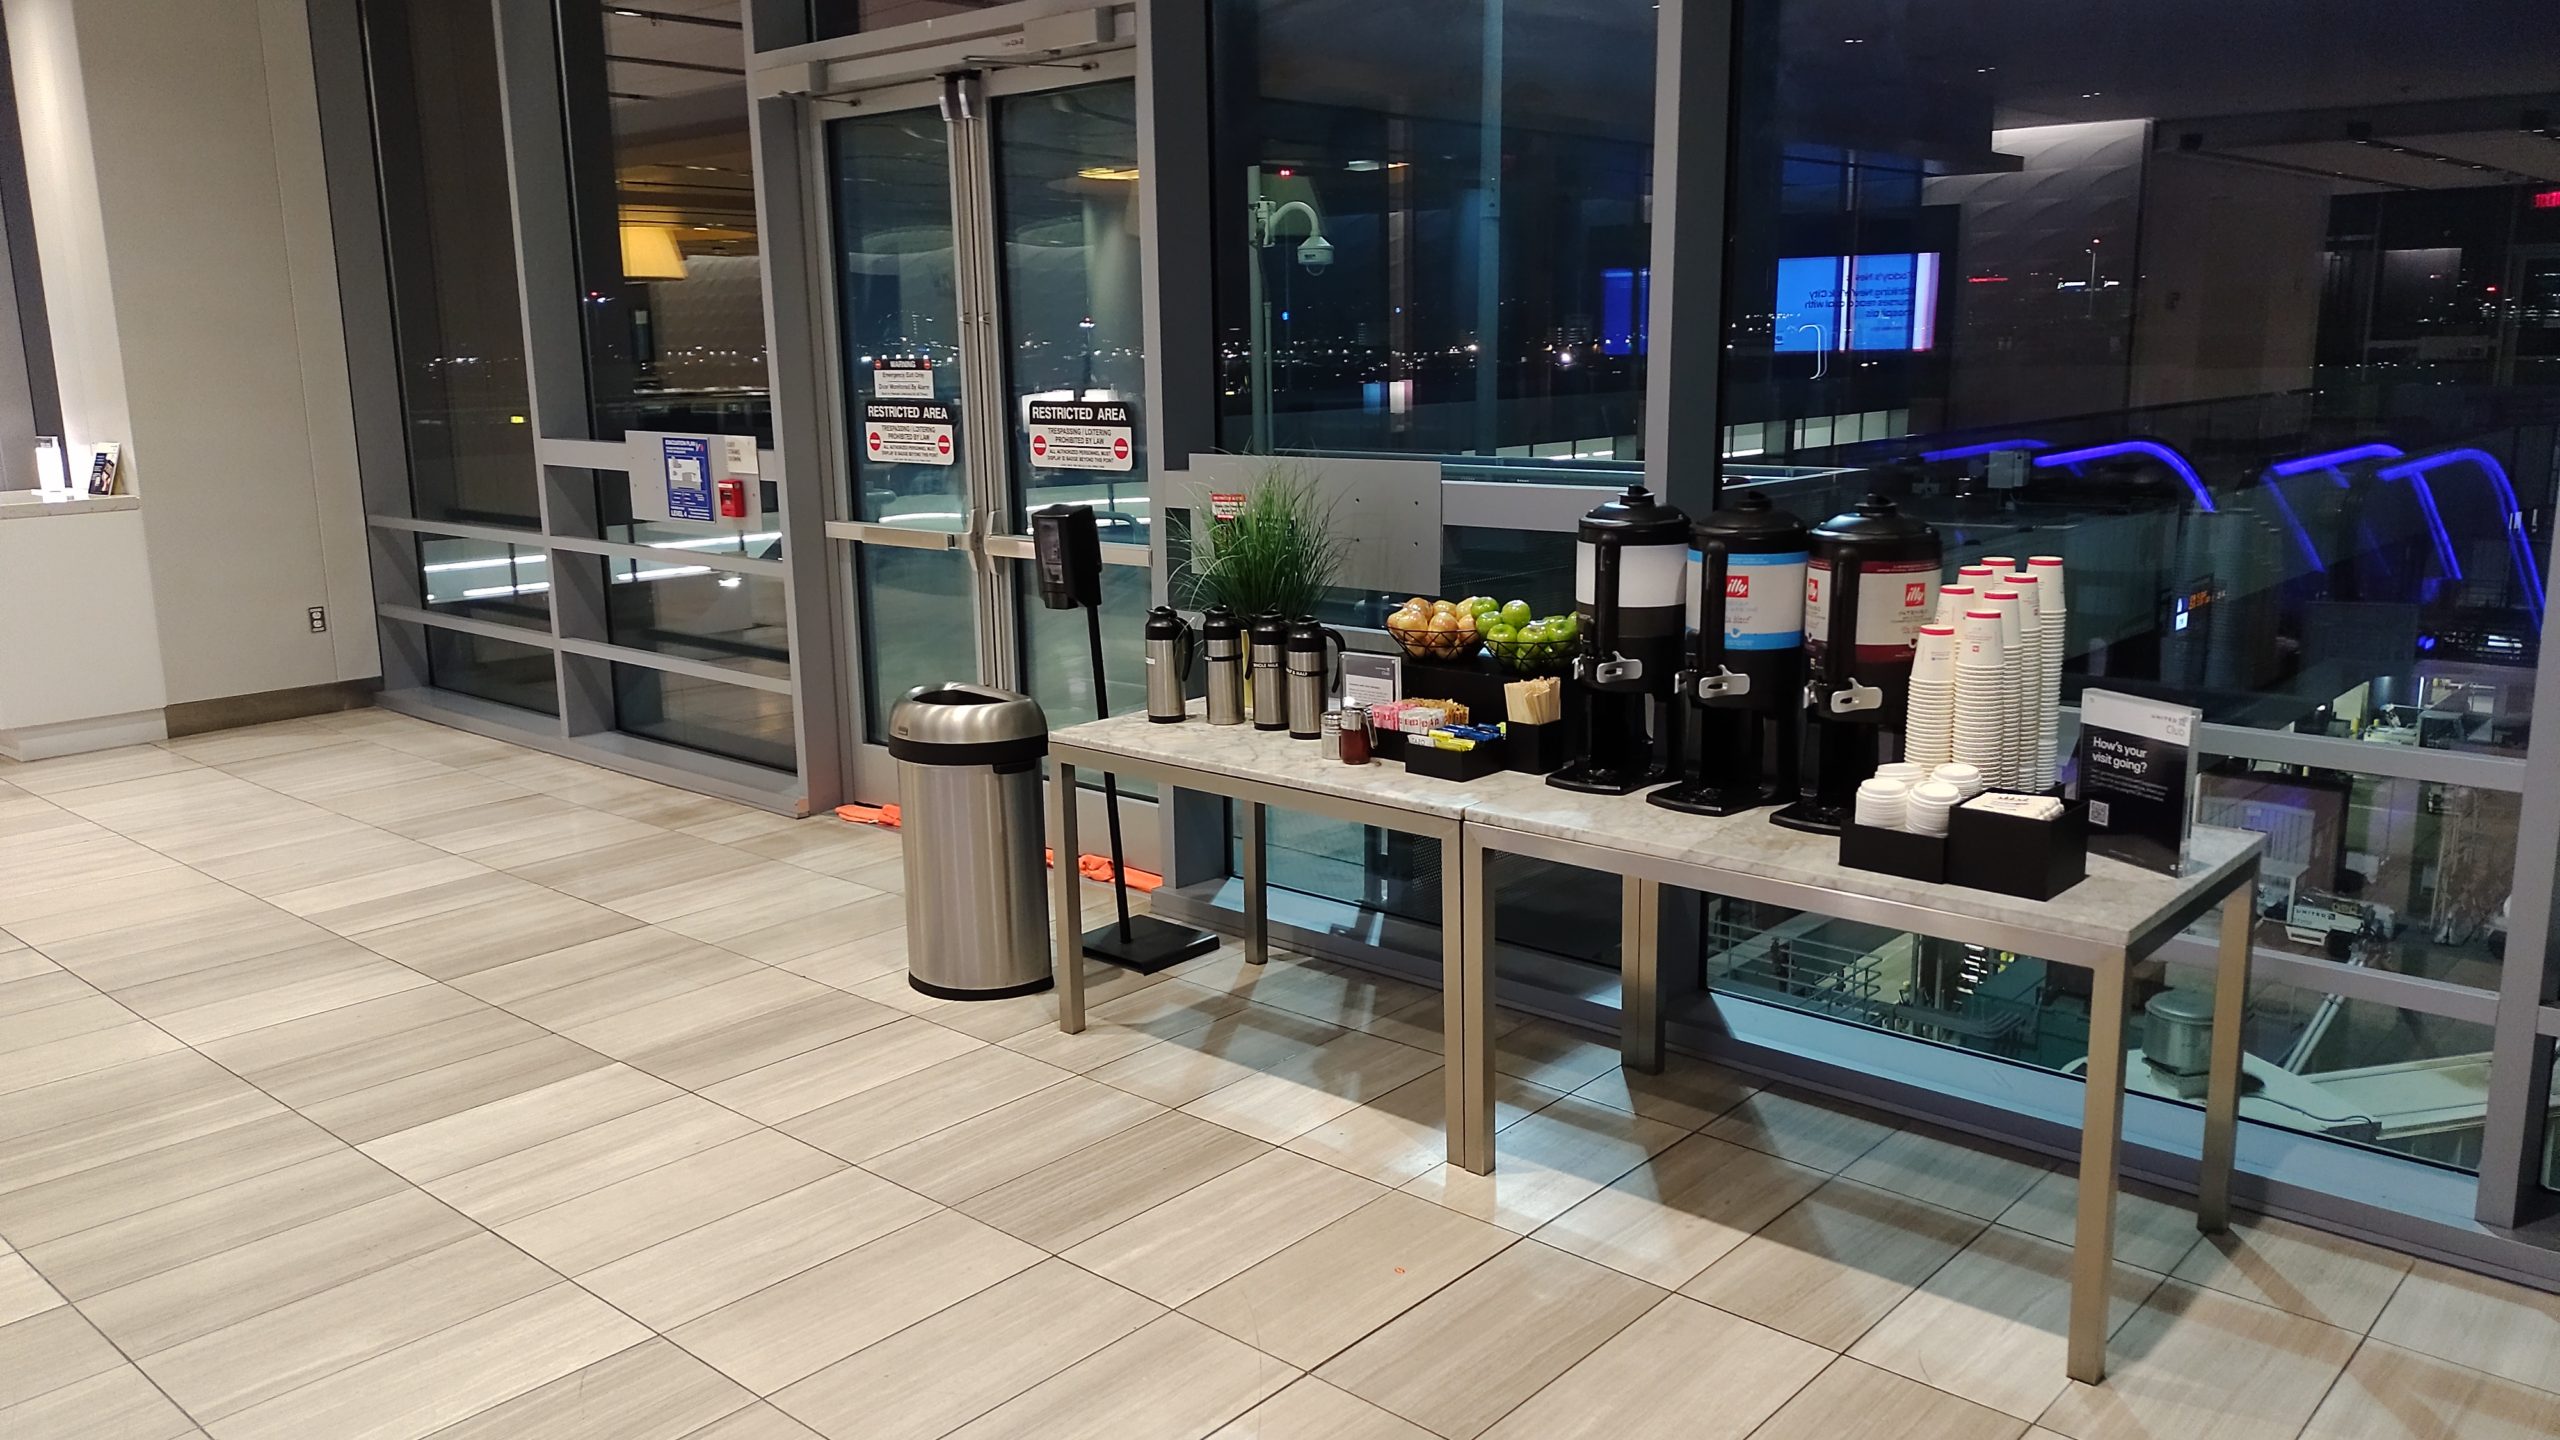 PICTURE OF THE COFFEE AND TEA STATION AT THE ENTRANCE TO THE CLUB.